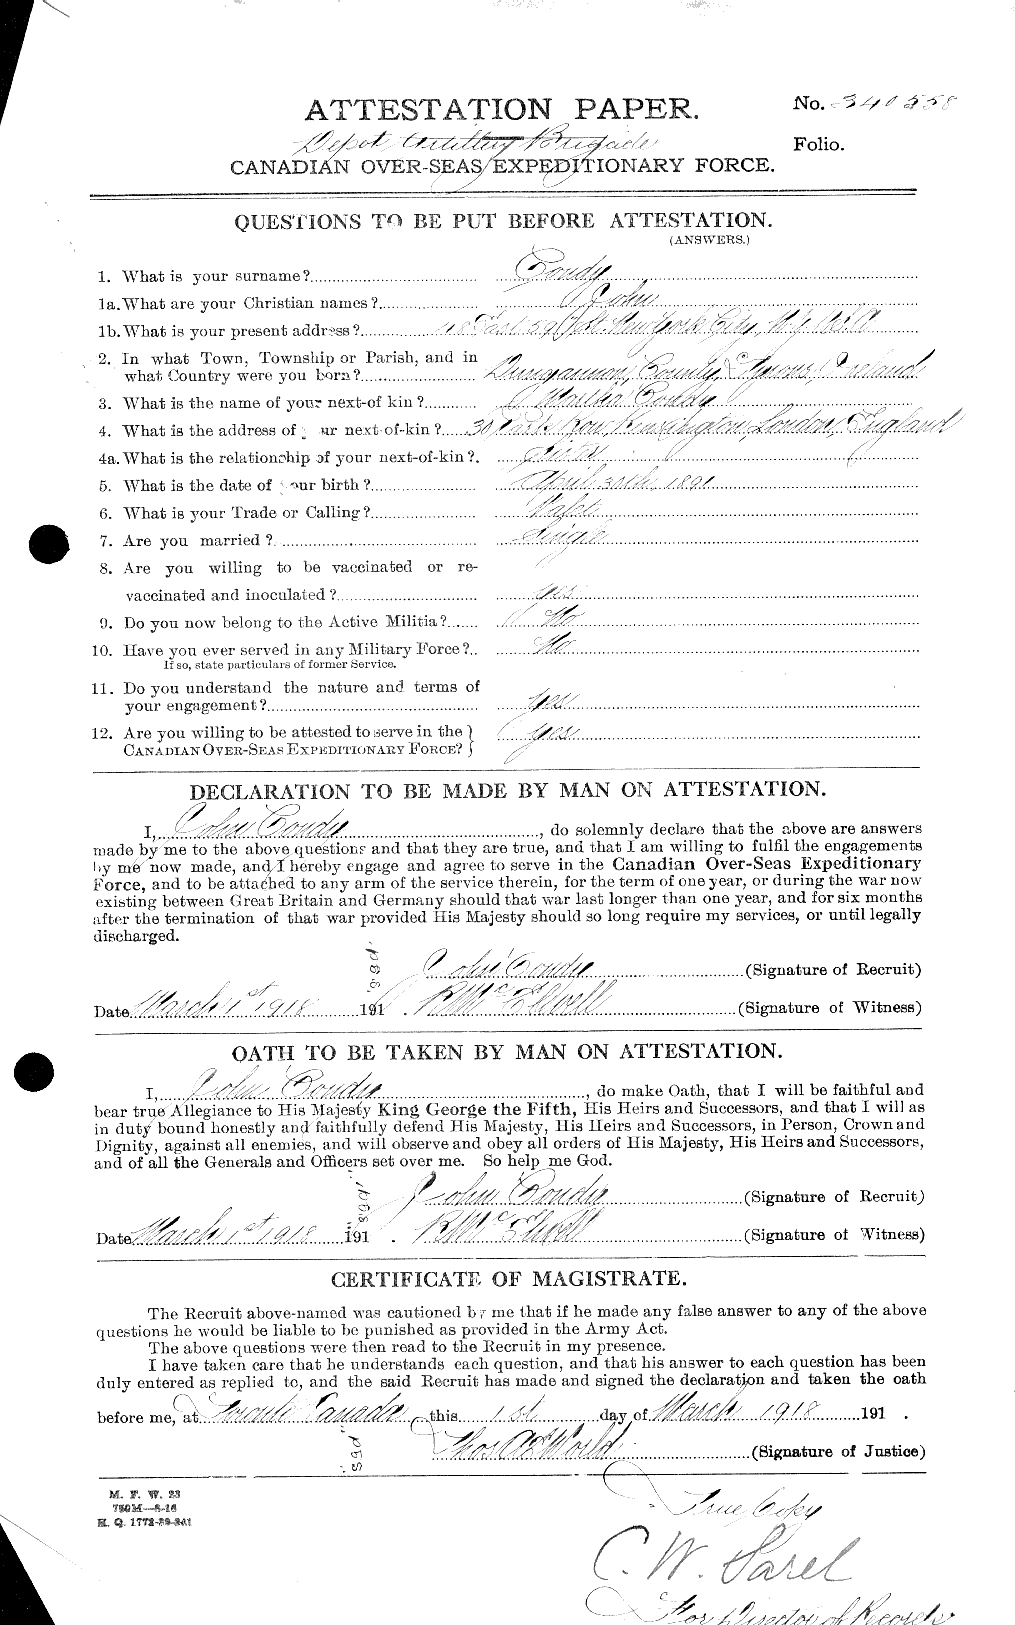 Personnel Records of the First World War - CEF 041069a